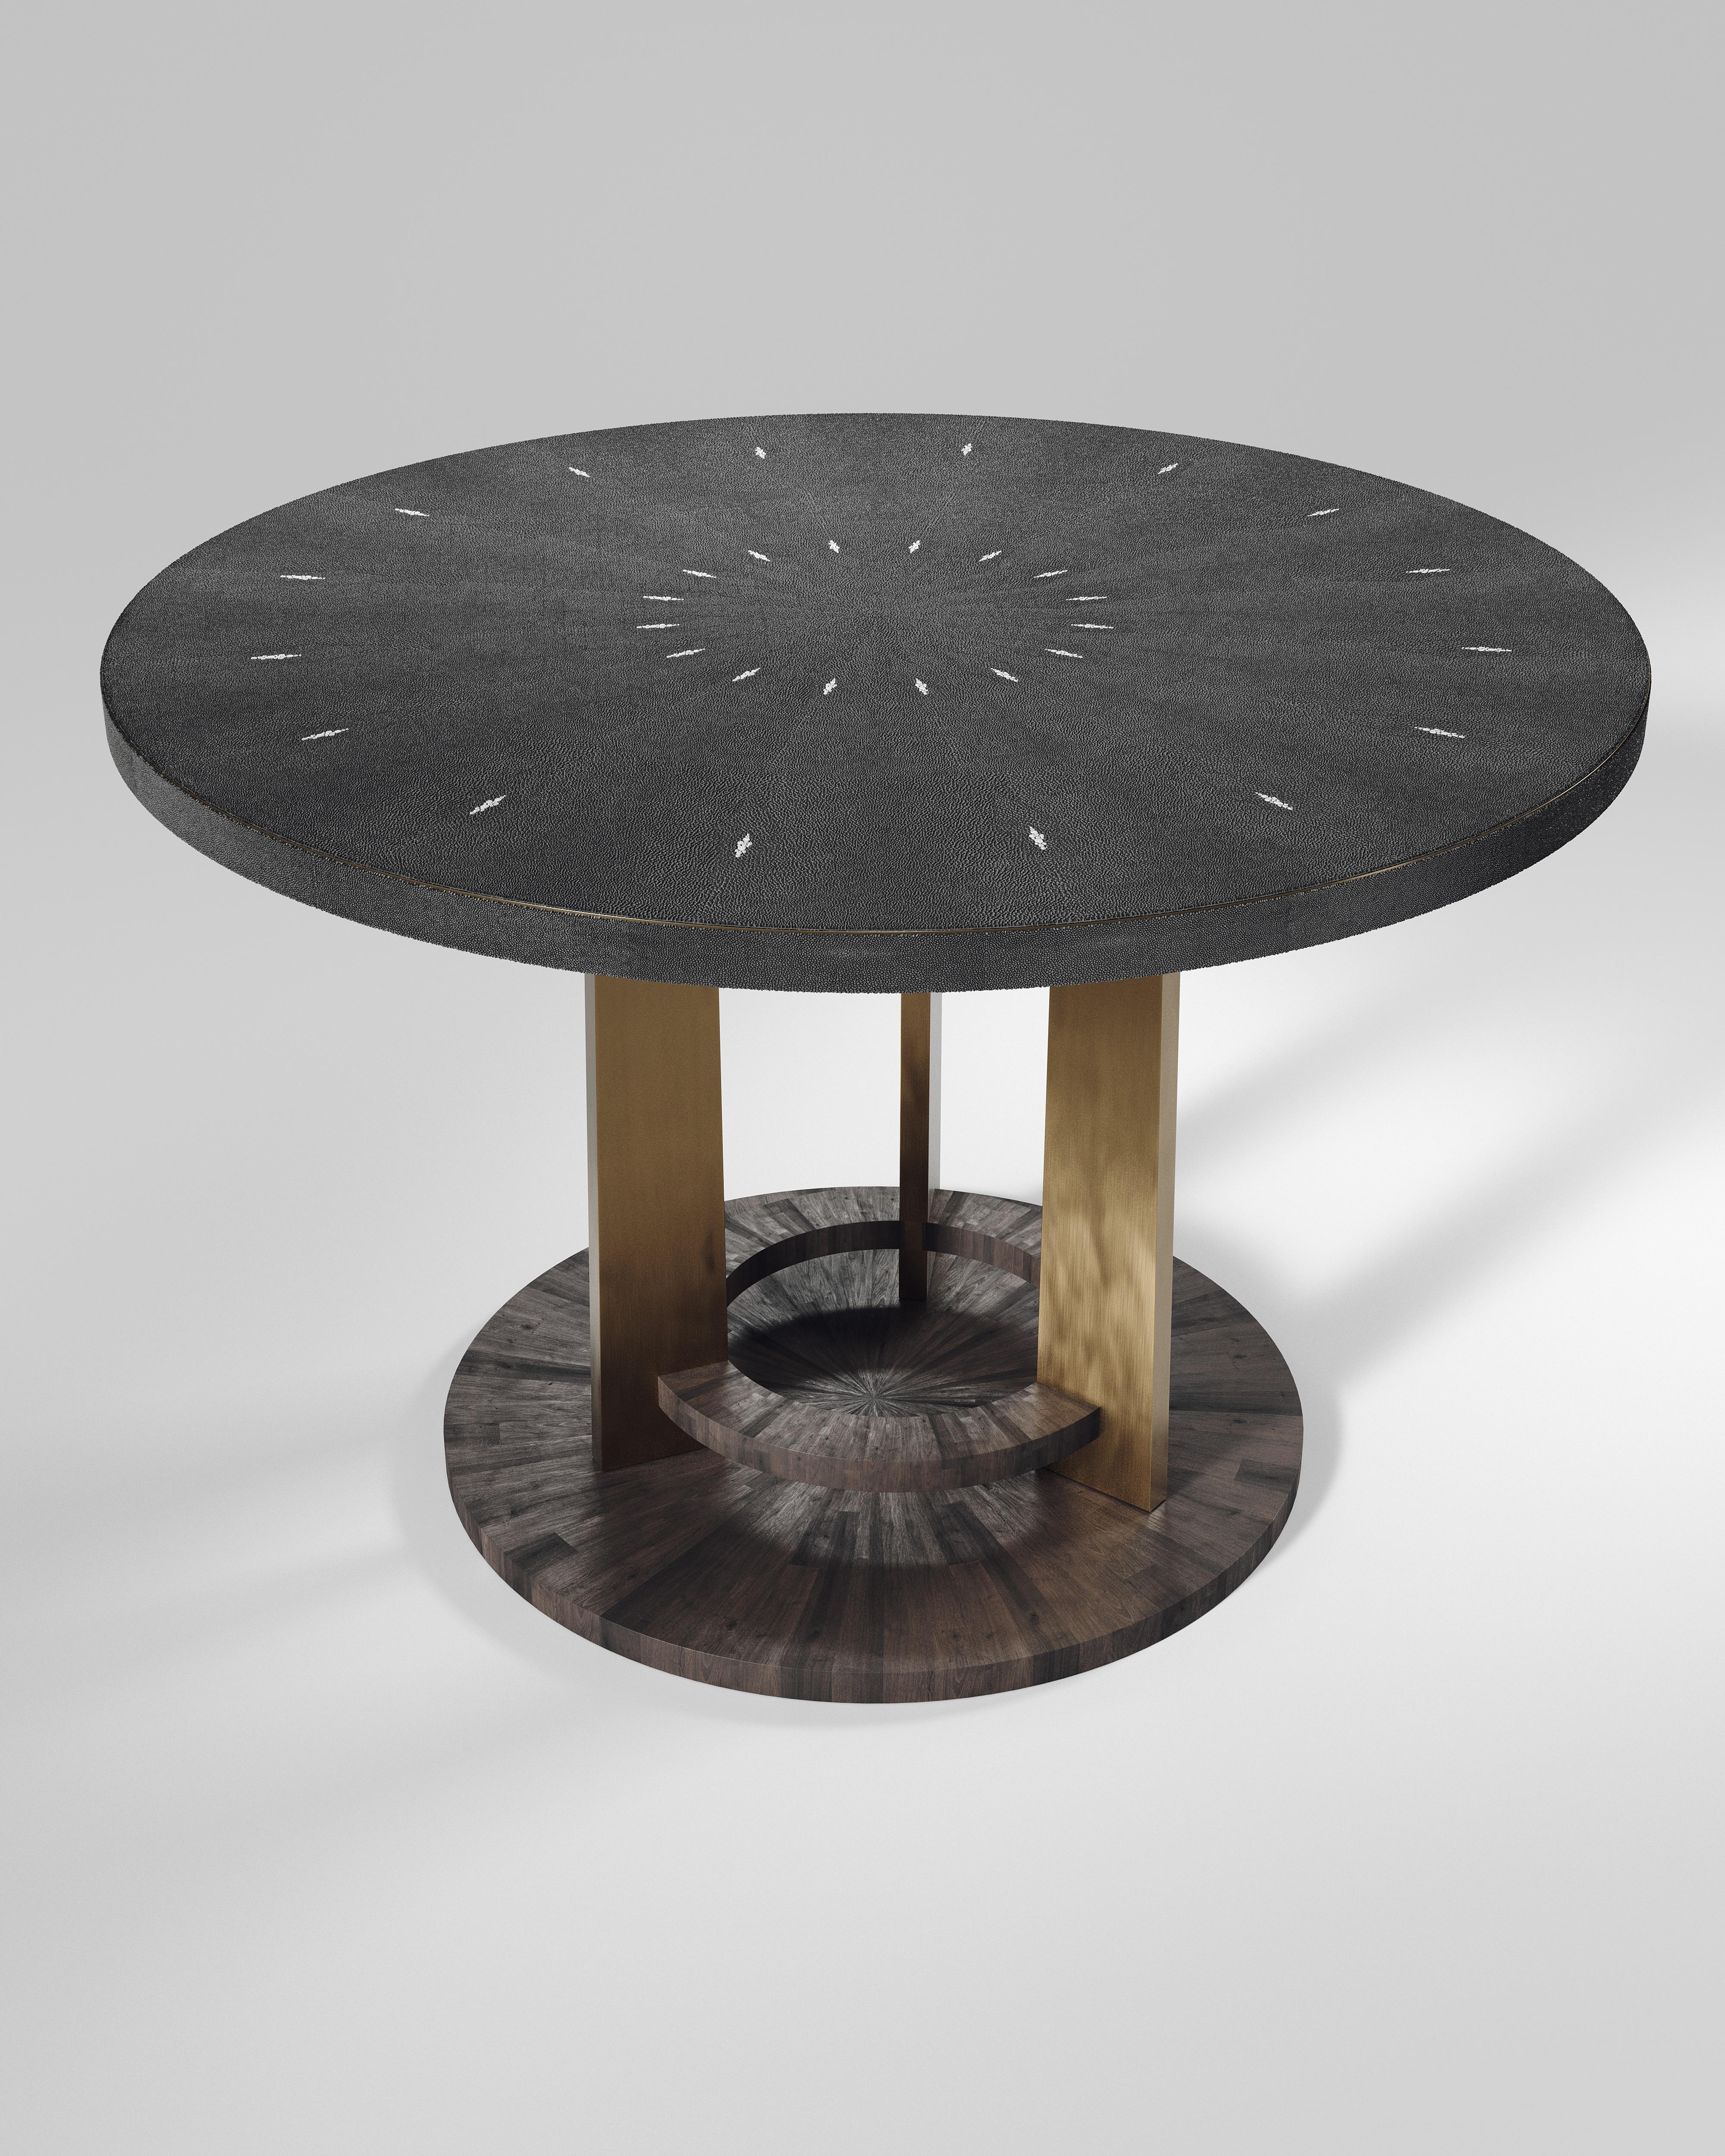 The Prague breakfast table by R&Y Augousti is an iconic design of their collection, debuting from the 1990s. This signature has been updated with metal accents on the border of the table and on the 3 legs. This classic center piece can be adapted